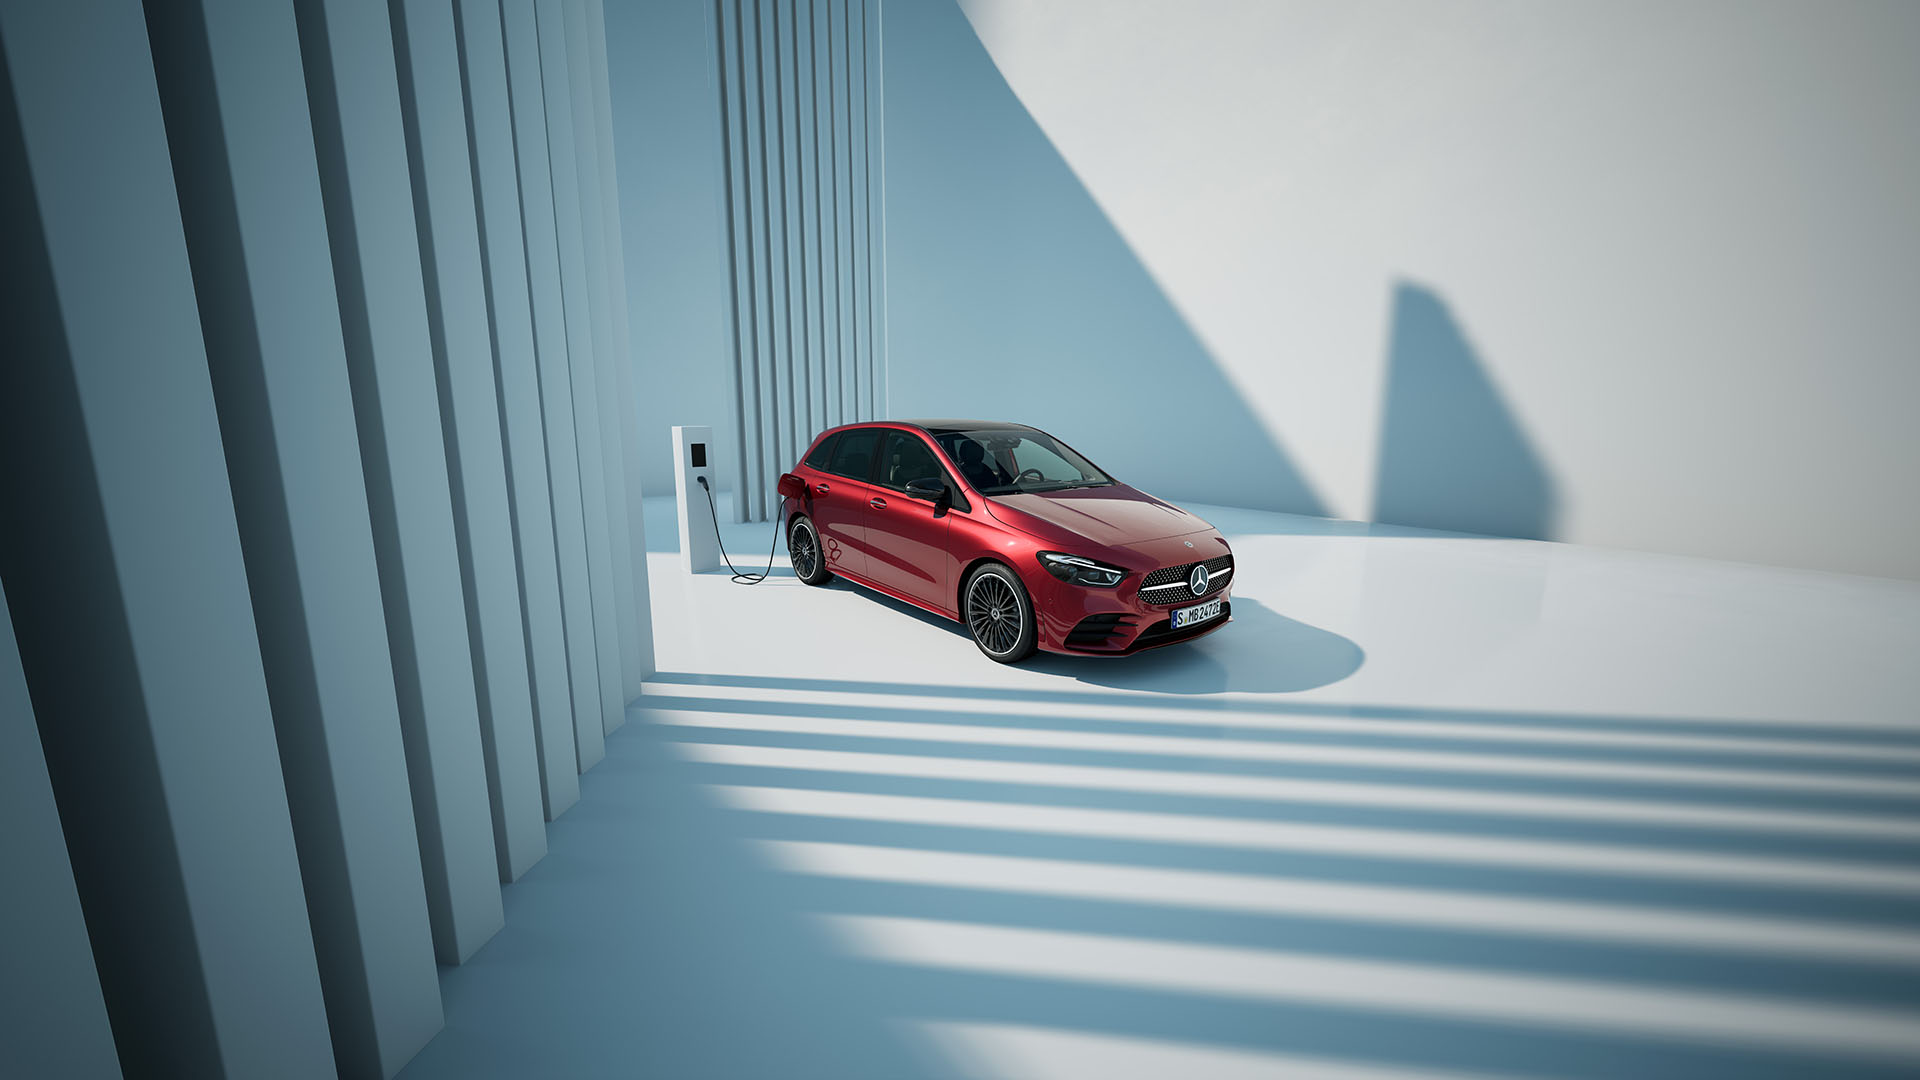 Mercedes-Benz B 250 e, fuel consumption combined, weighted (WLTP) 1,2-0,9 l/100 km, electric energy consumption combined, weighted (WLTP) 17.4-15.4 kWh/100km, CO2 emissions combined, weighted (WLTP) 27-20 g/km; exterior: patagonia red MANUFAKTUR, AMG line Mercedes-Benz B 250 e, fuel consumption combined, weighted (WLTP) 1,2-0,9 l/100 km, electric energy consumption combined, weighted (WLTP) 17.4-15.4 kWh/100km, CO2 emissions combined, weighted (WLTP) 27-20 g/km; exterior: patagonia red MANUFAKTUR, AMG line;Fuel consumption combined, weighted (WLTP) 1,2-0,9 l/100 km, electric energy consumption combined, weighted (WLTP) 17.4-15.4 kWh/100km, CO2 emissions combined, weighted (WLTP) 27-20 g/km*